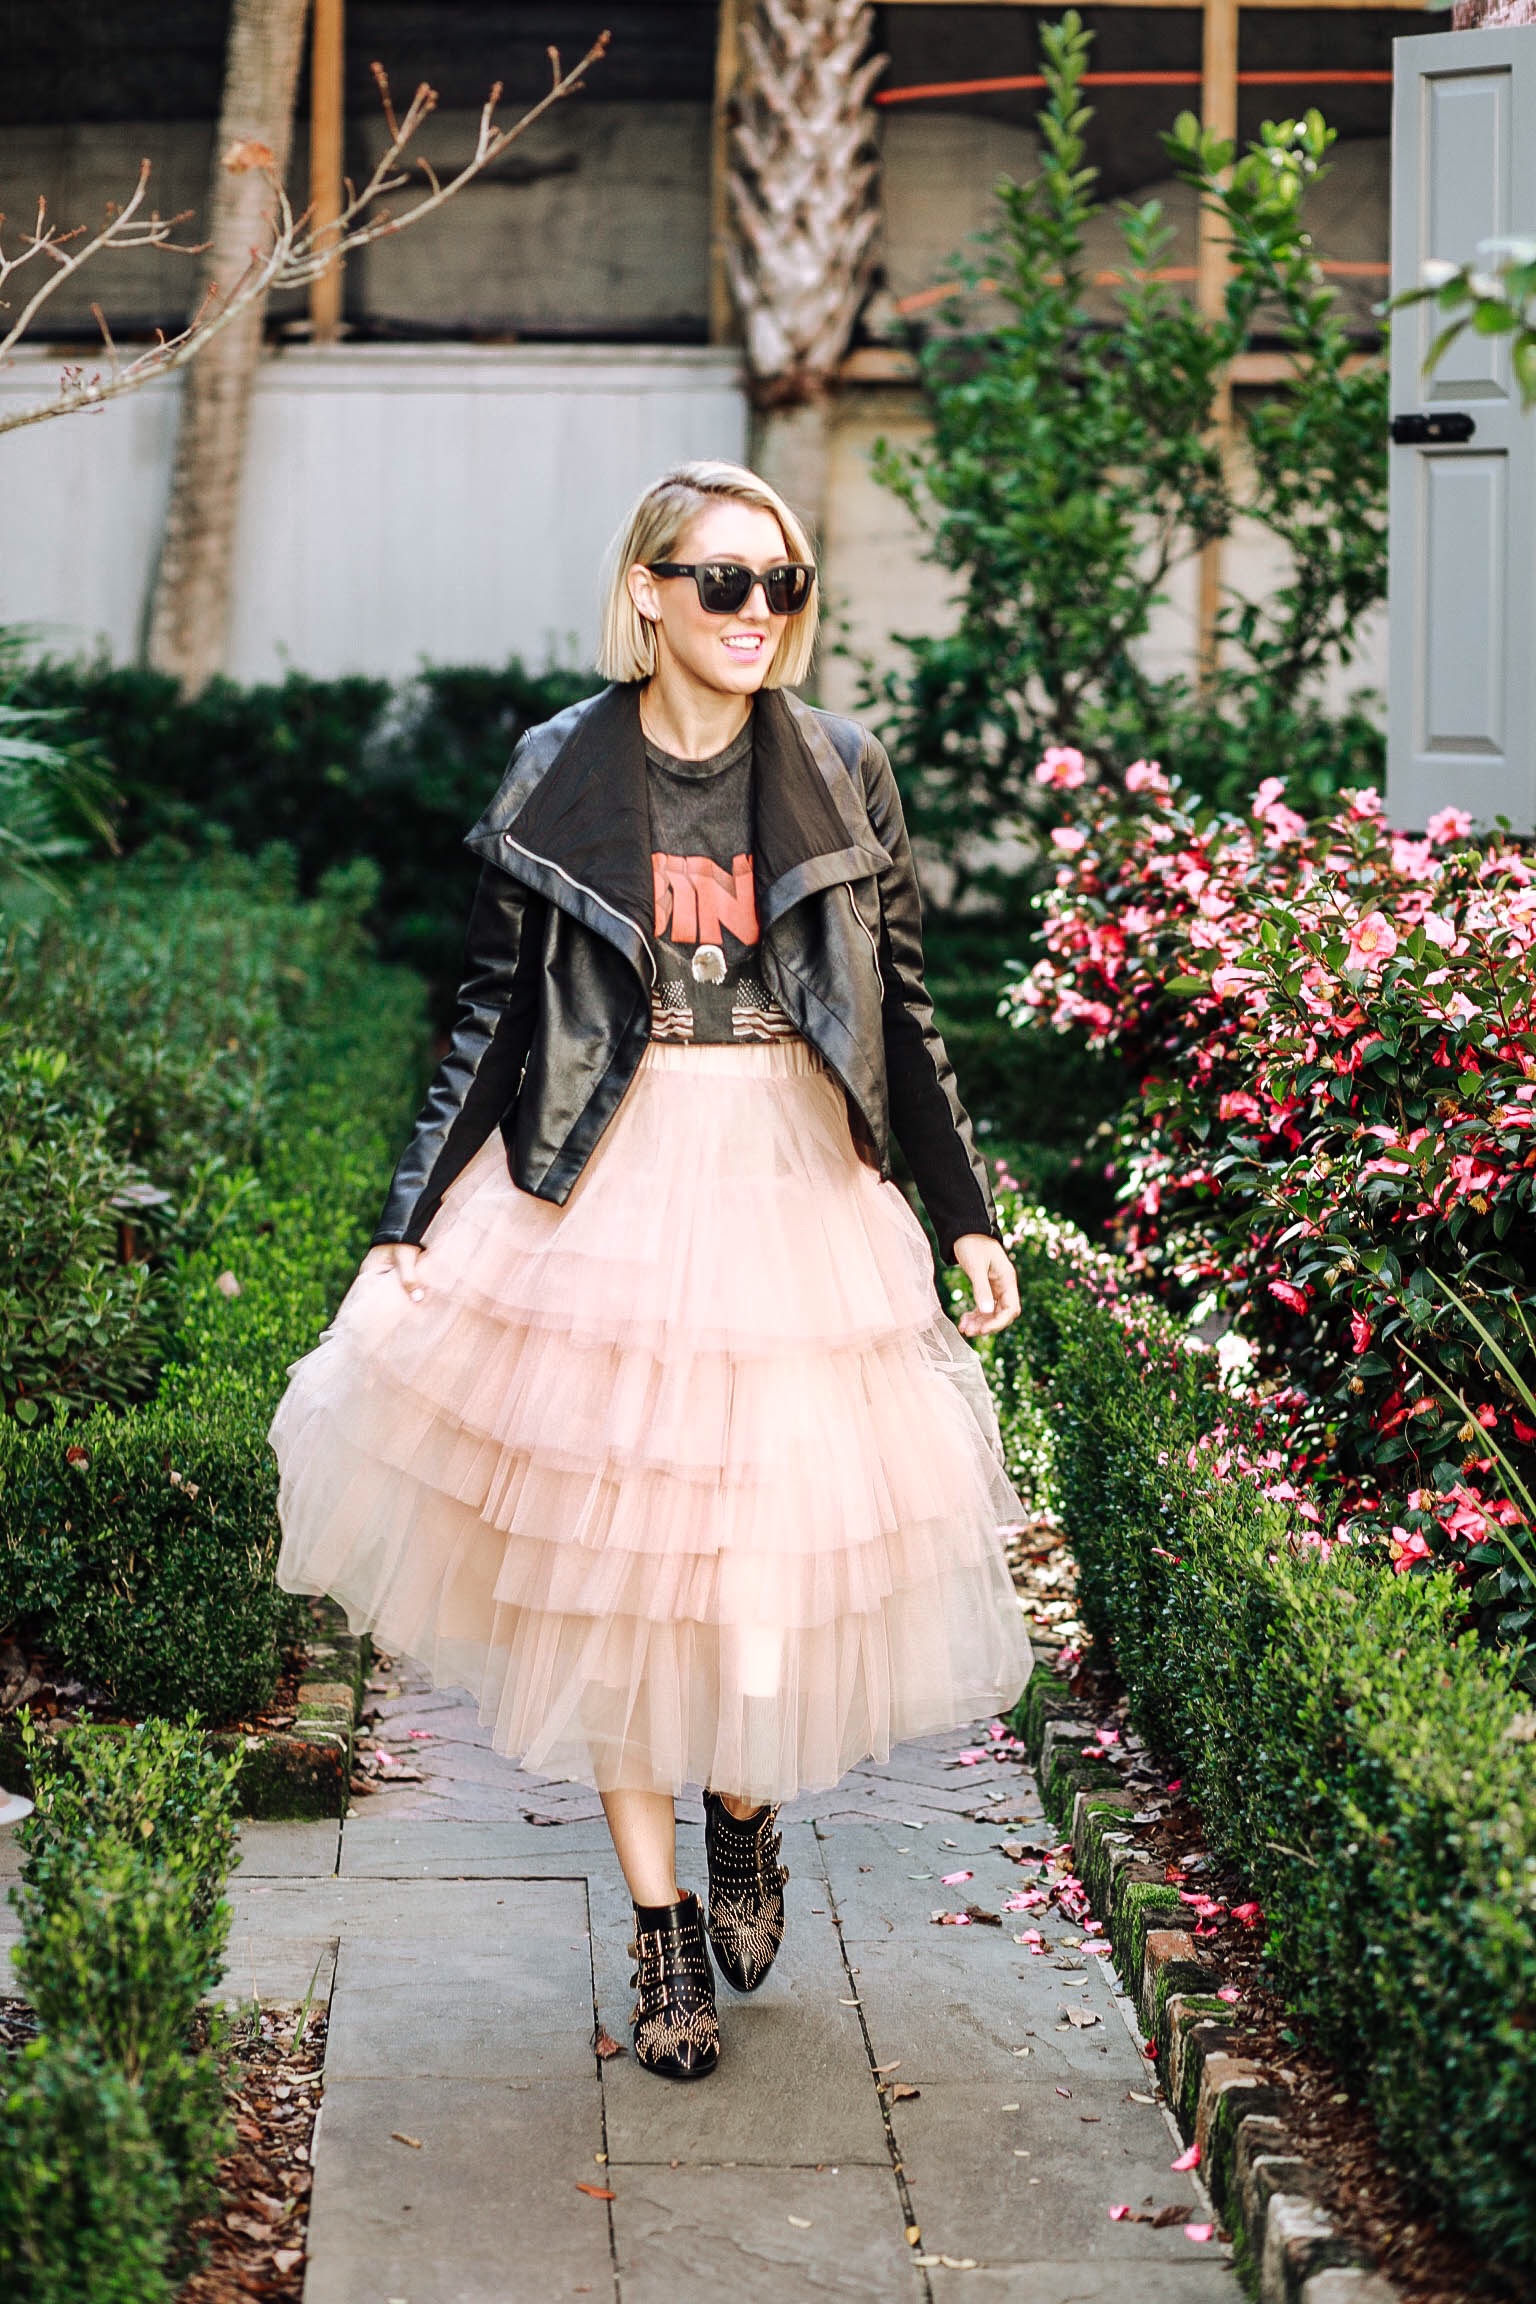 how to style a tutu